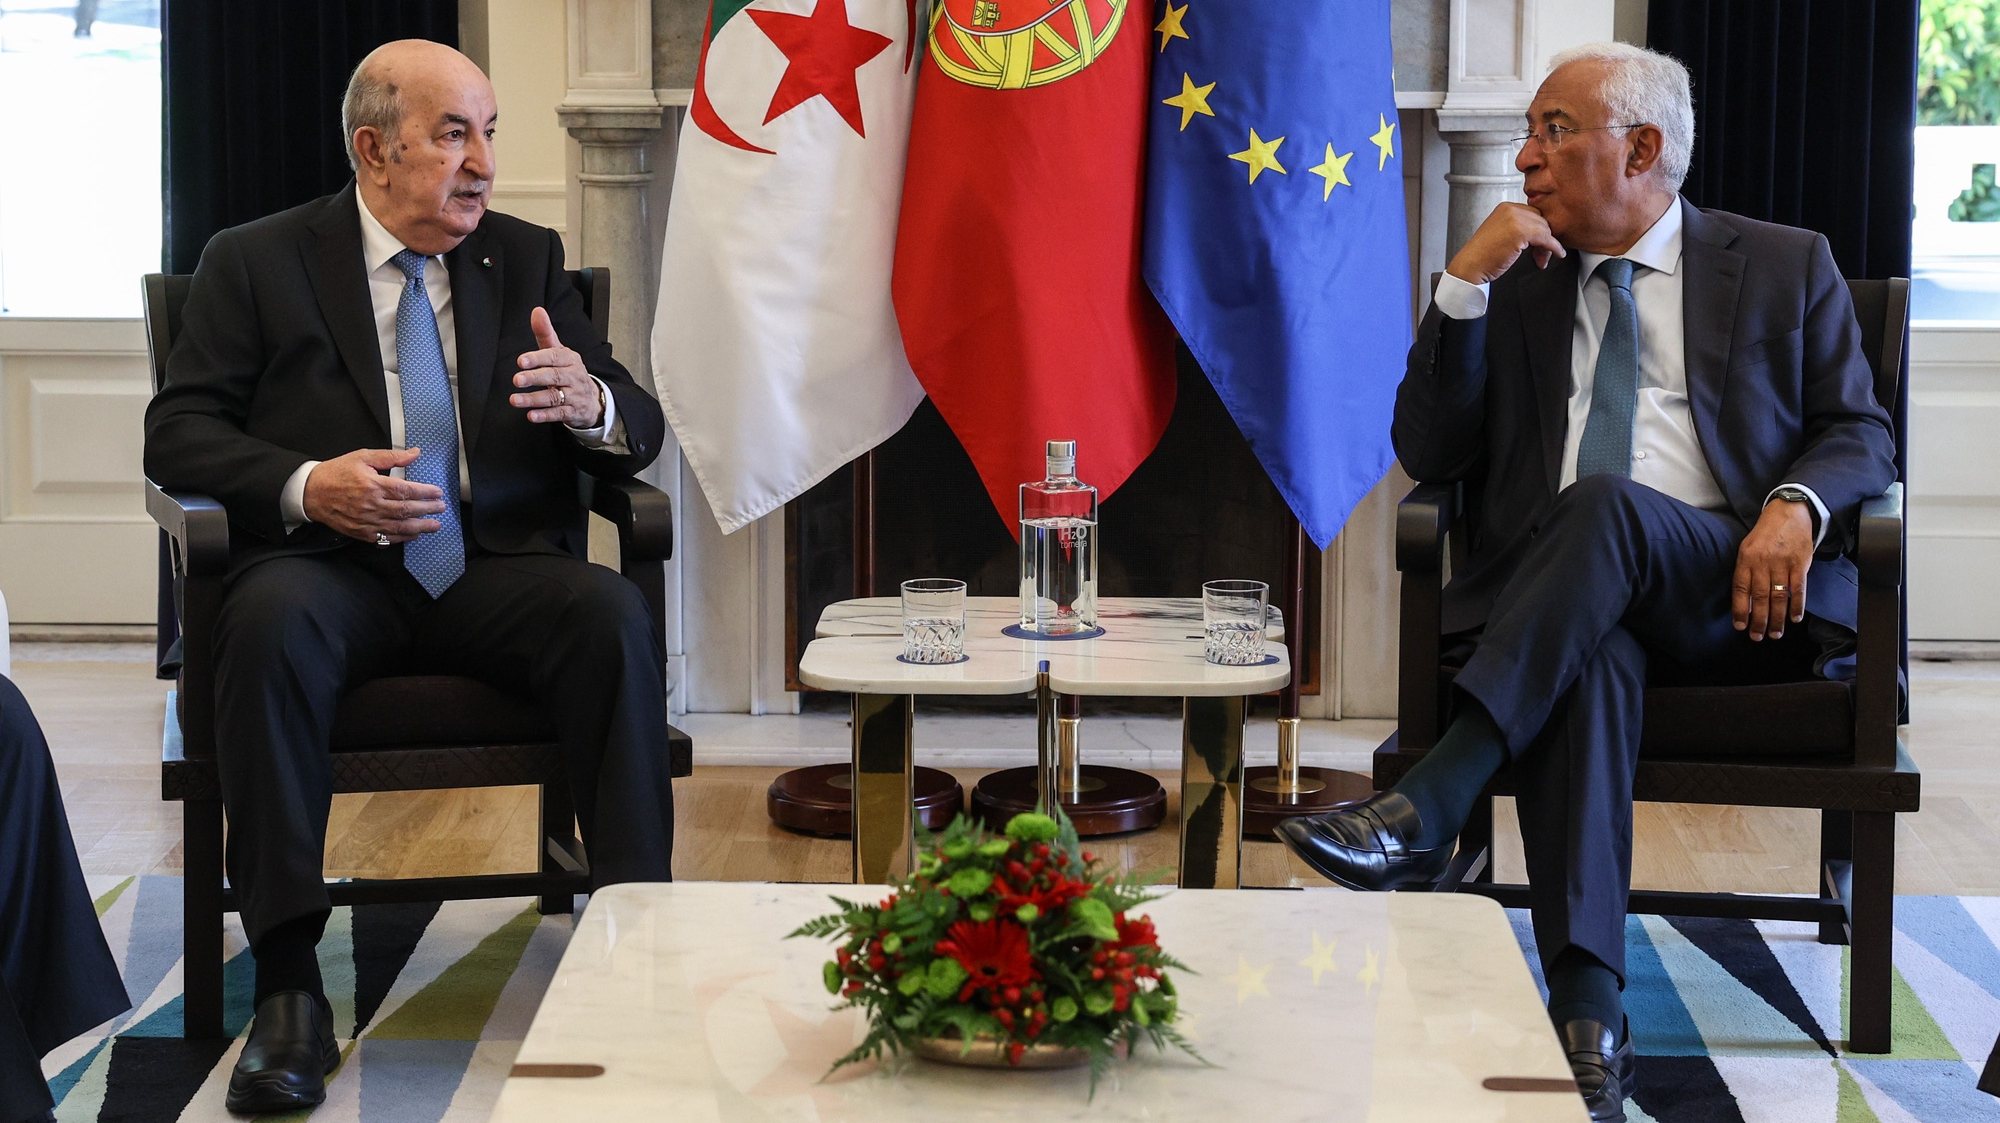 The Prime Minister of Portugal Antonio Costa (R) meet Algerian President Abdelmadjid Tebboune (L) at Sao Bento Palace in Lisbon, Portugal, 24 May 2023. MIGUEL A. LOPES/LUSA